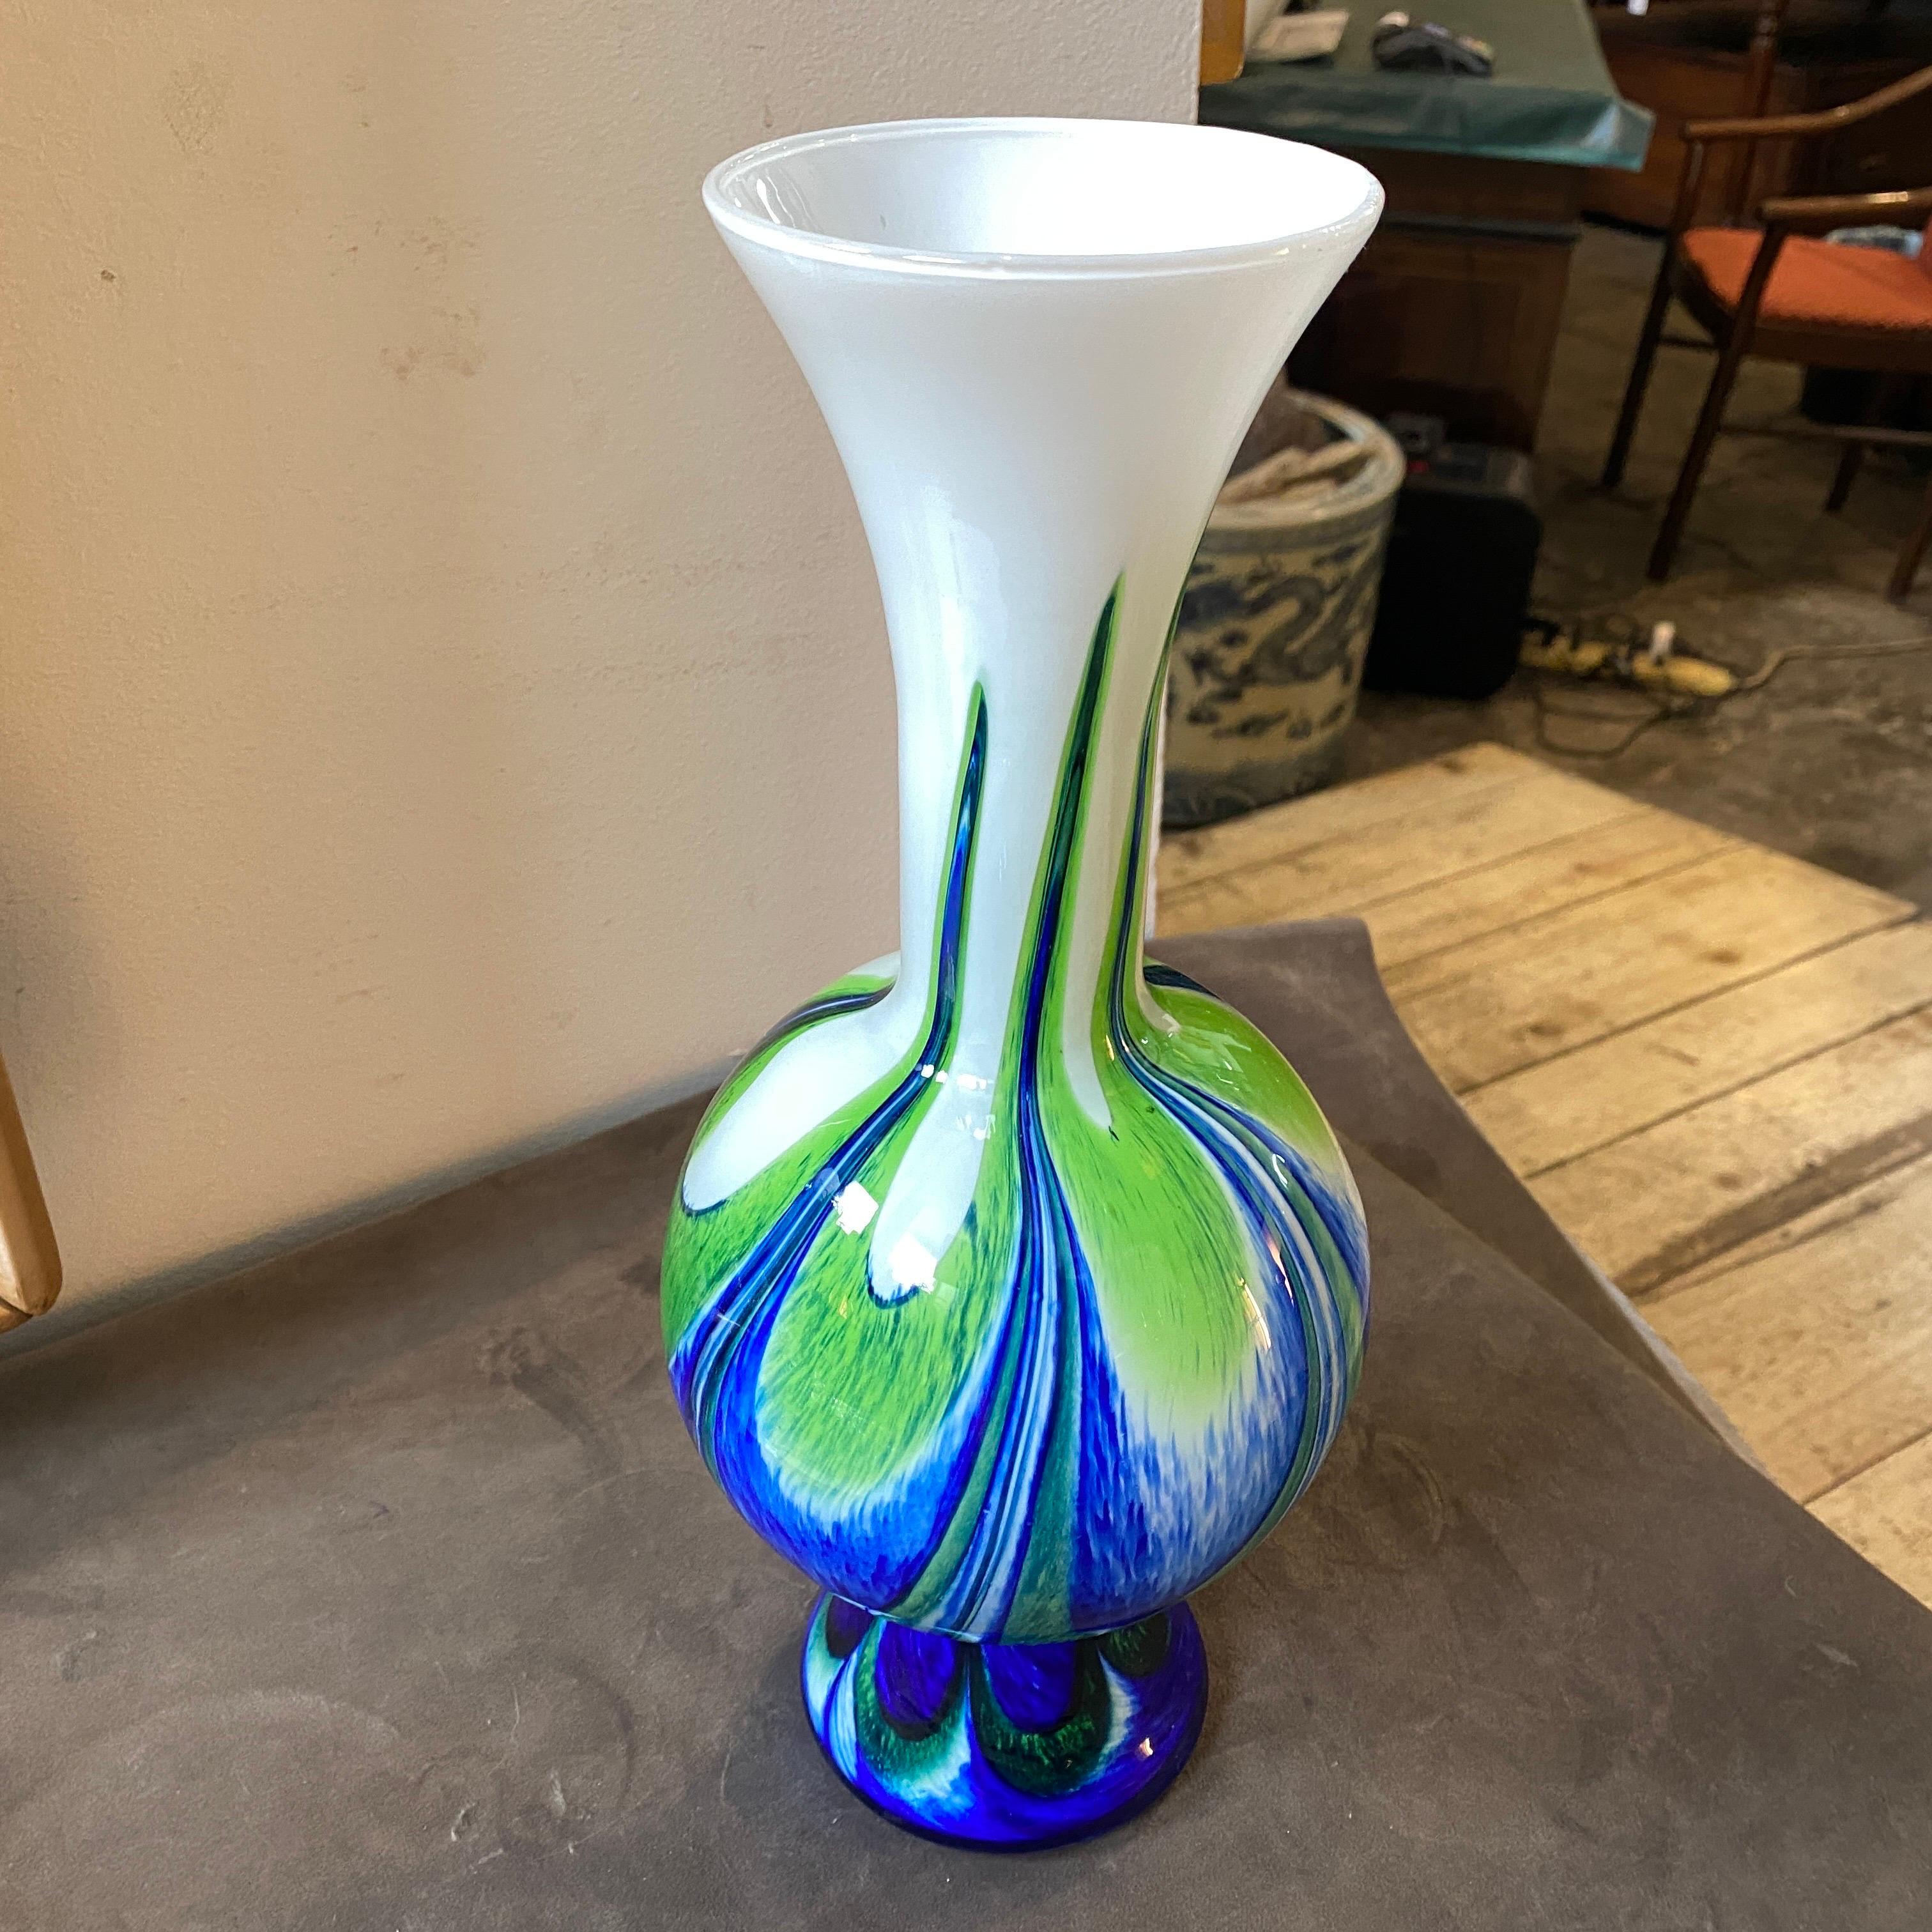 A rare blue and green and white opaline glass vase made in Italy in the Seventies by Opaline Florence. Every single vase it's different from the other ones. The vase it's in perfect condition. Carlo Moretti is an esteemed Italian glass designer and